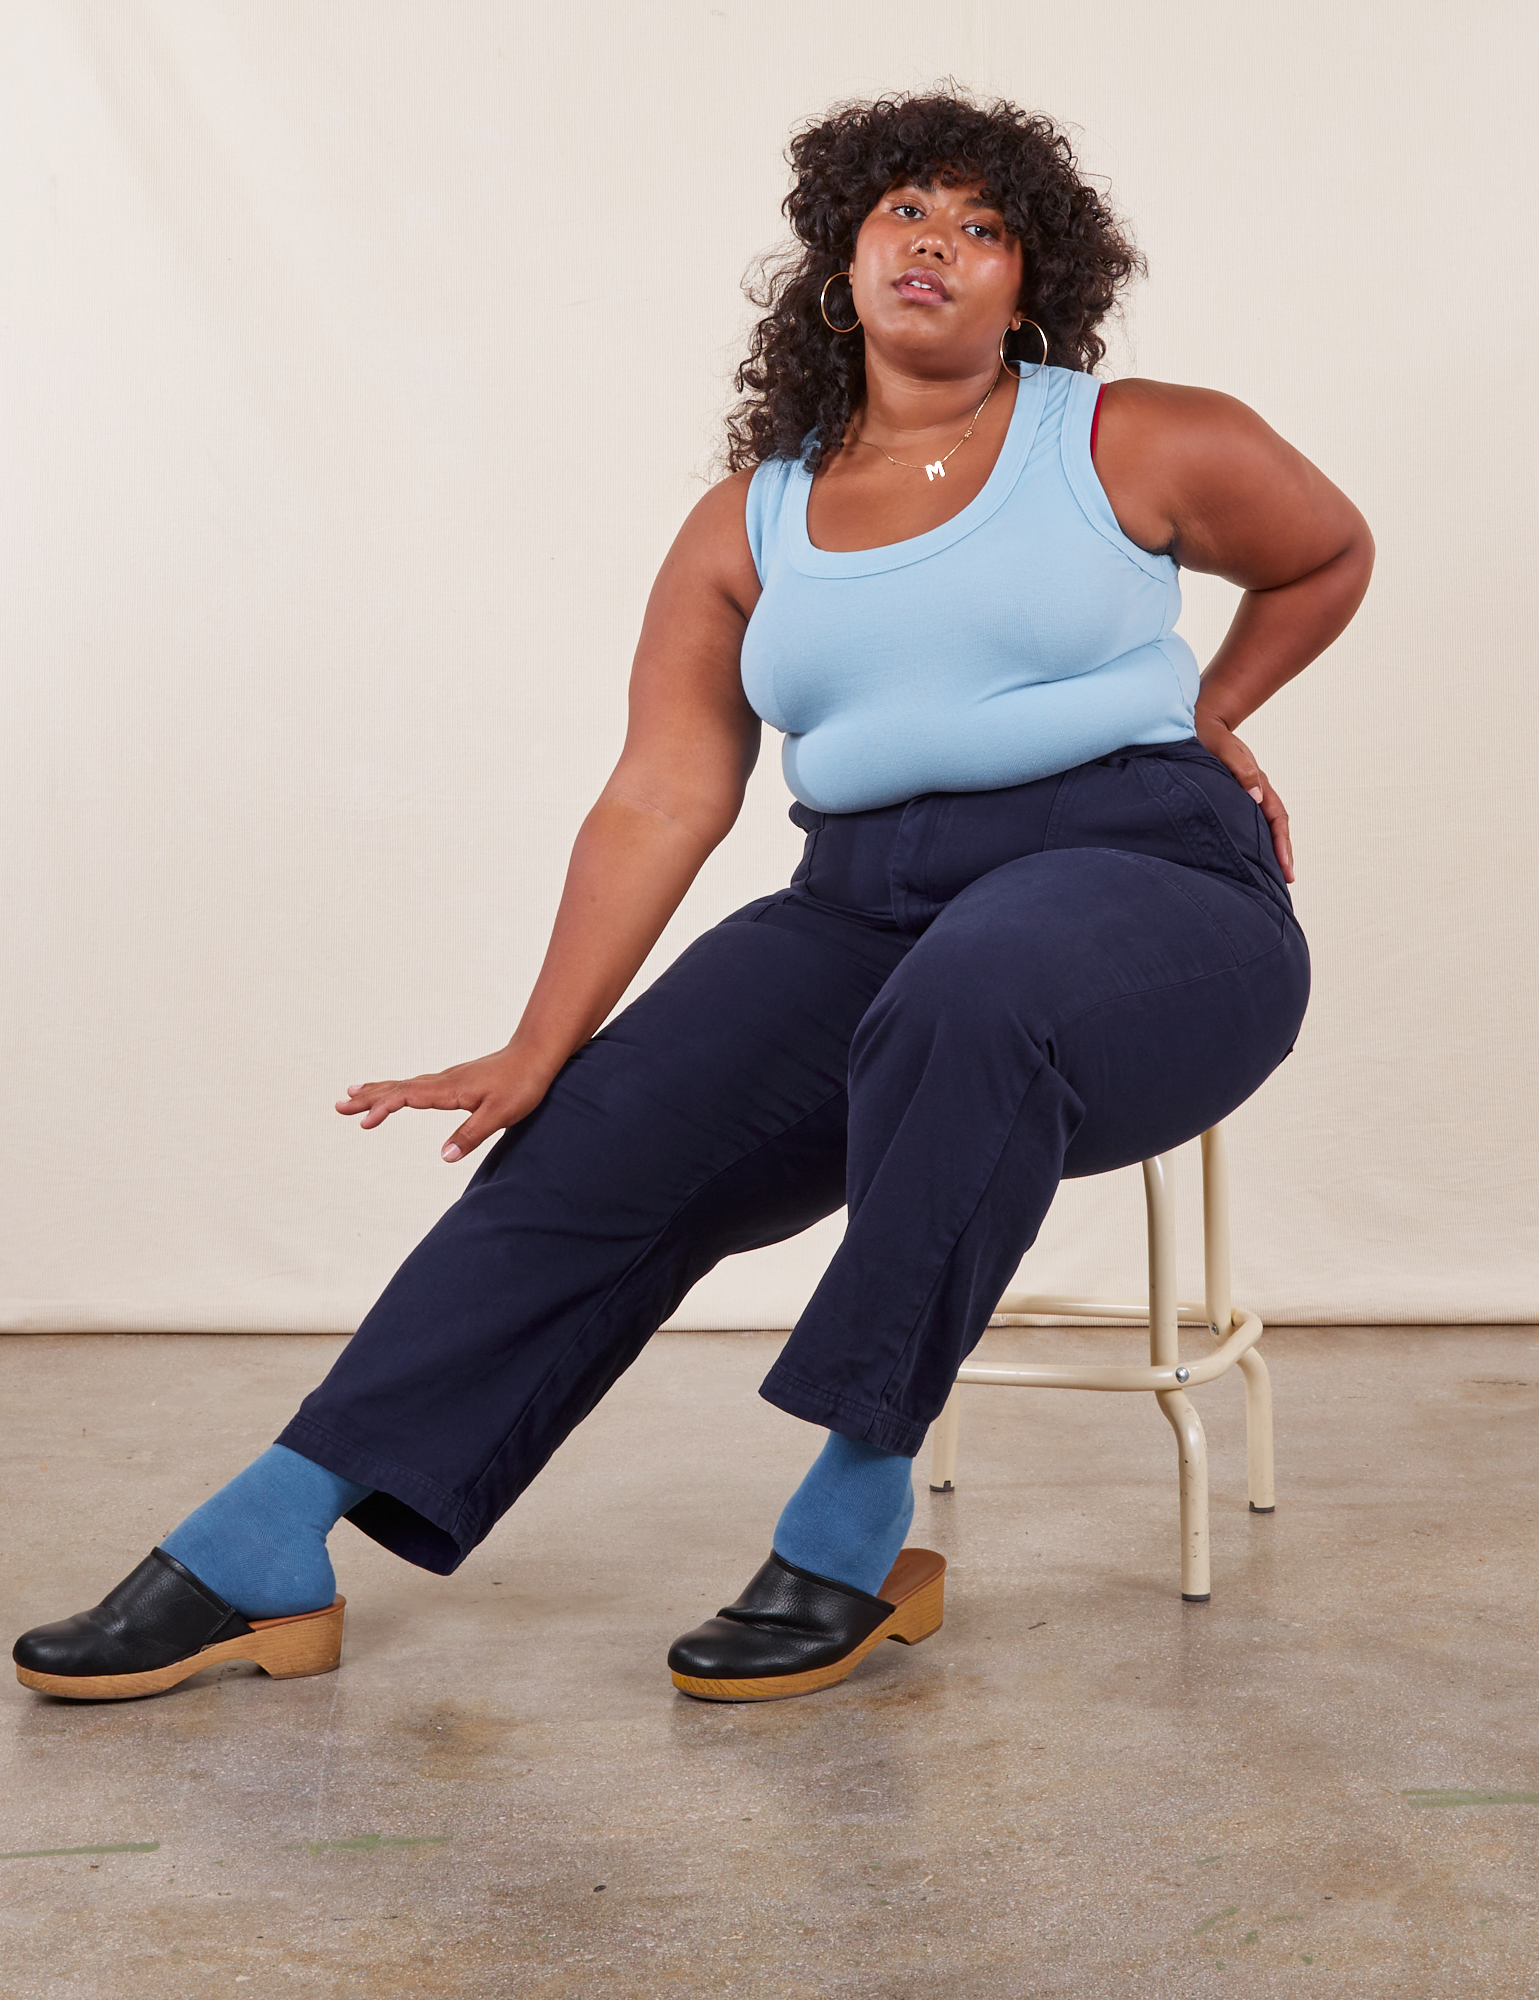 Morgan is sitting on a vintage stool wearing Work Pants in Navy Blue and a baby blue Tank Top